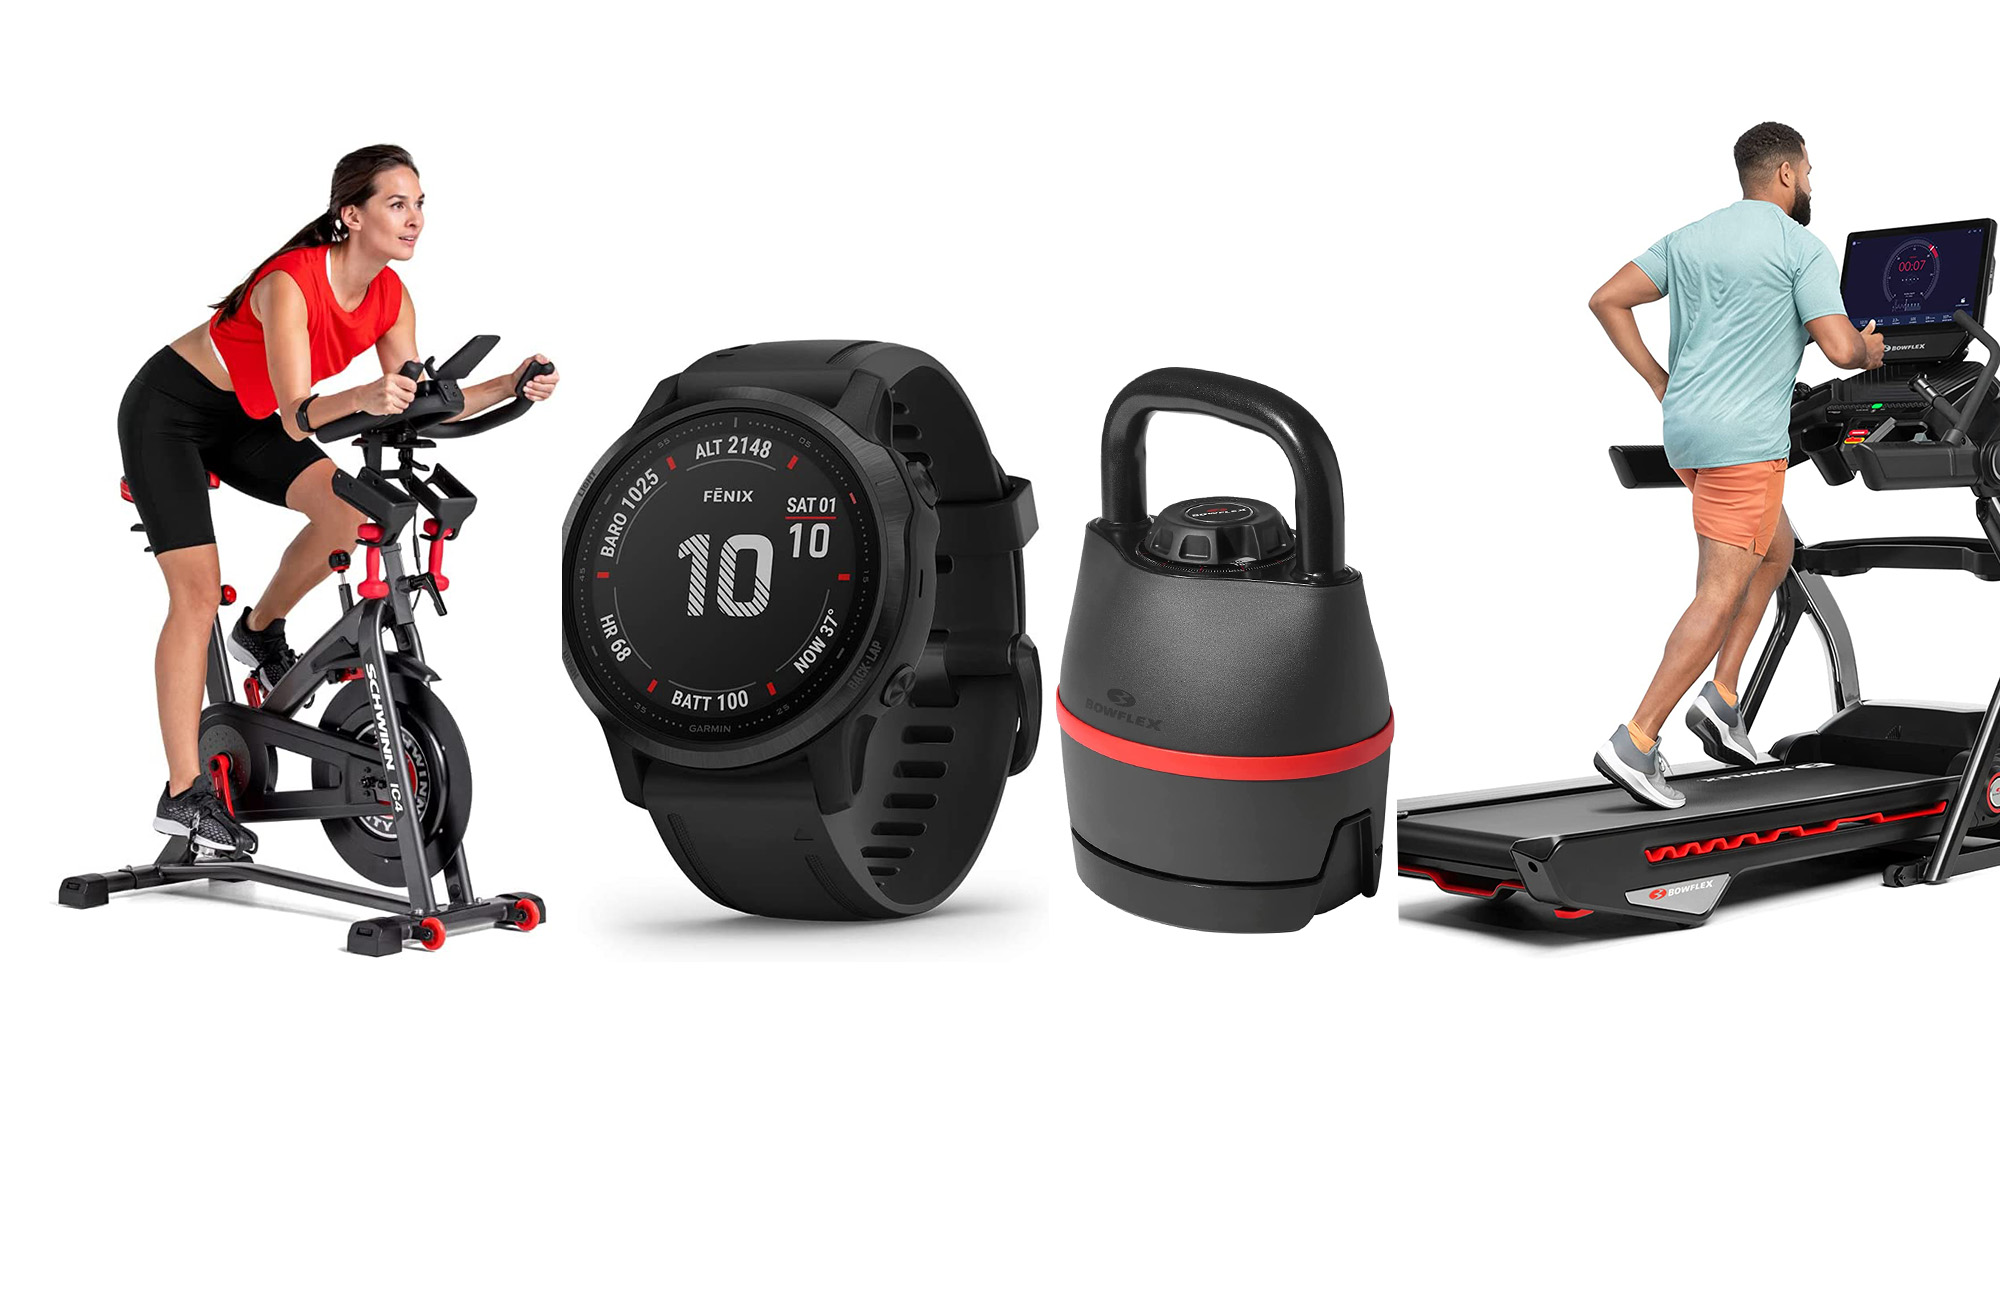 Save on smartwatches, home gym equipment and more during Black Friday fitness deals in 2022.